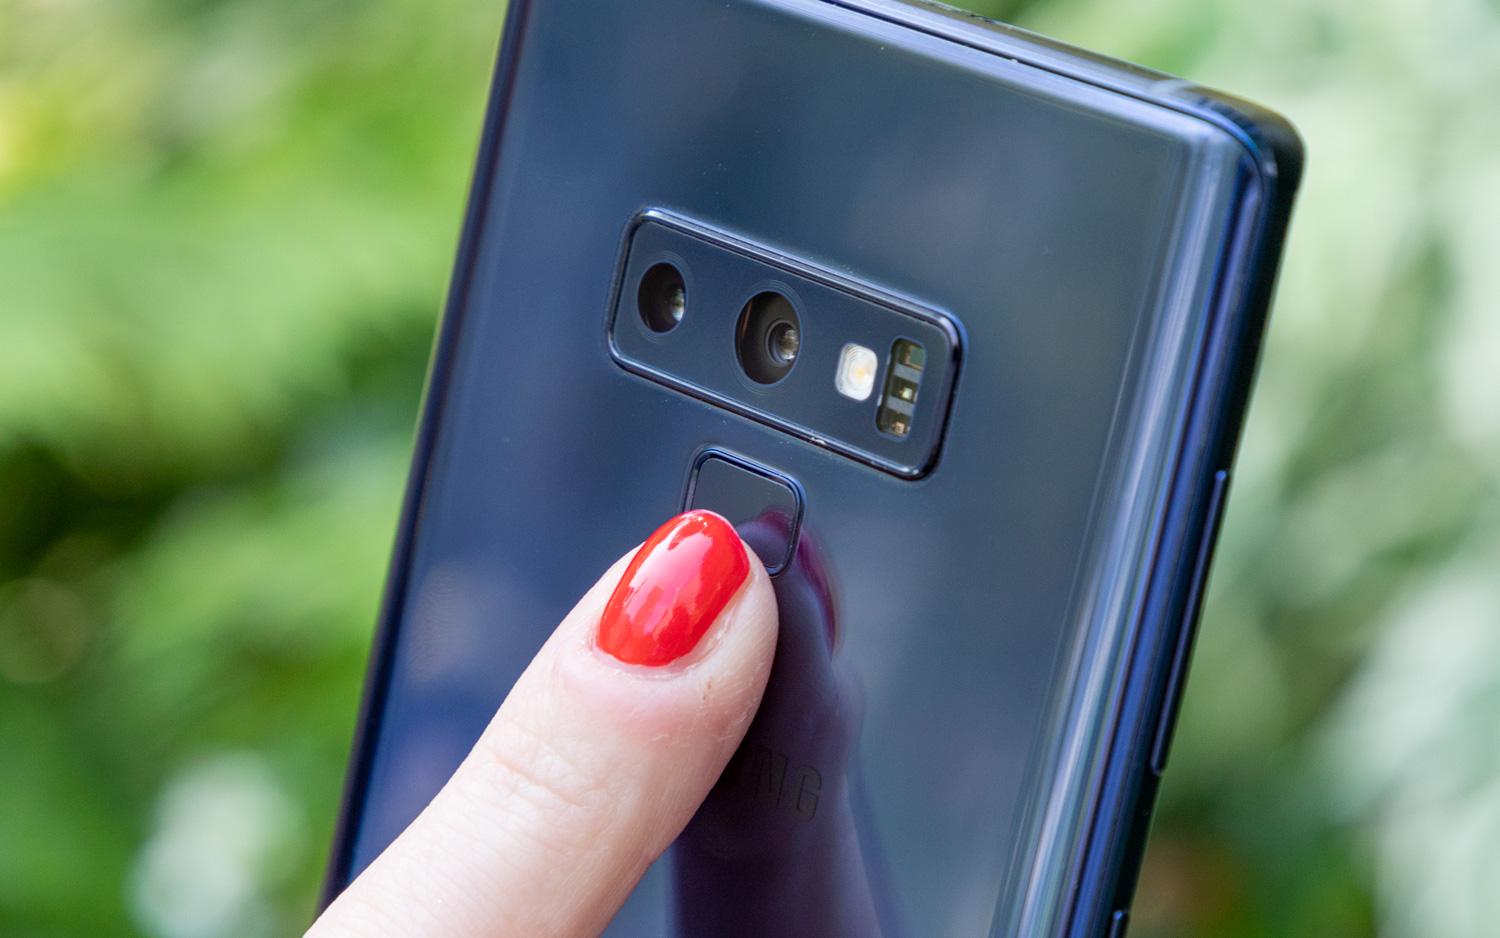 New Galaxy Note 10 Leak Tips Multiple Design Changes